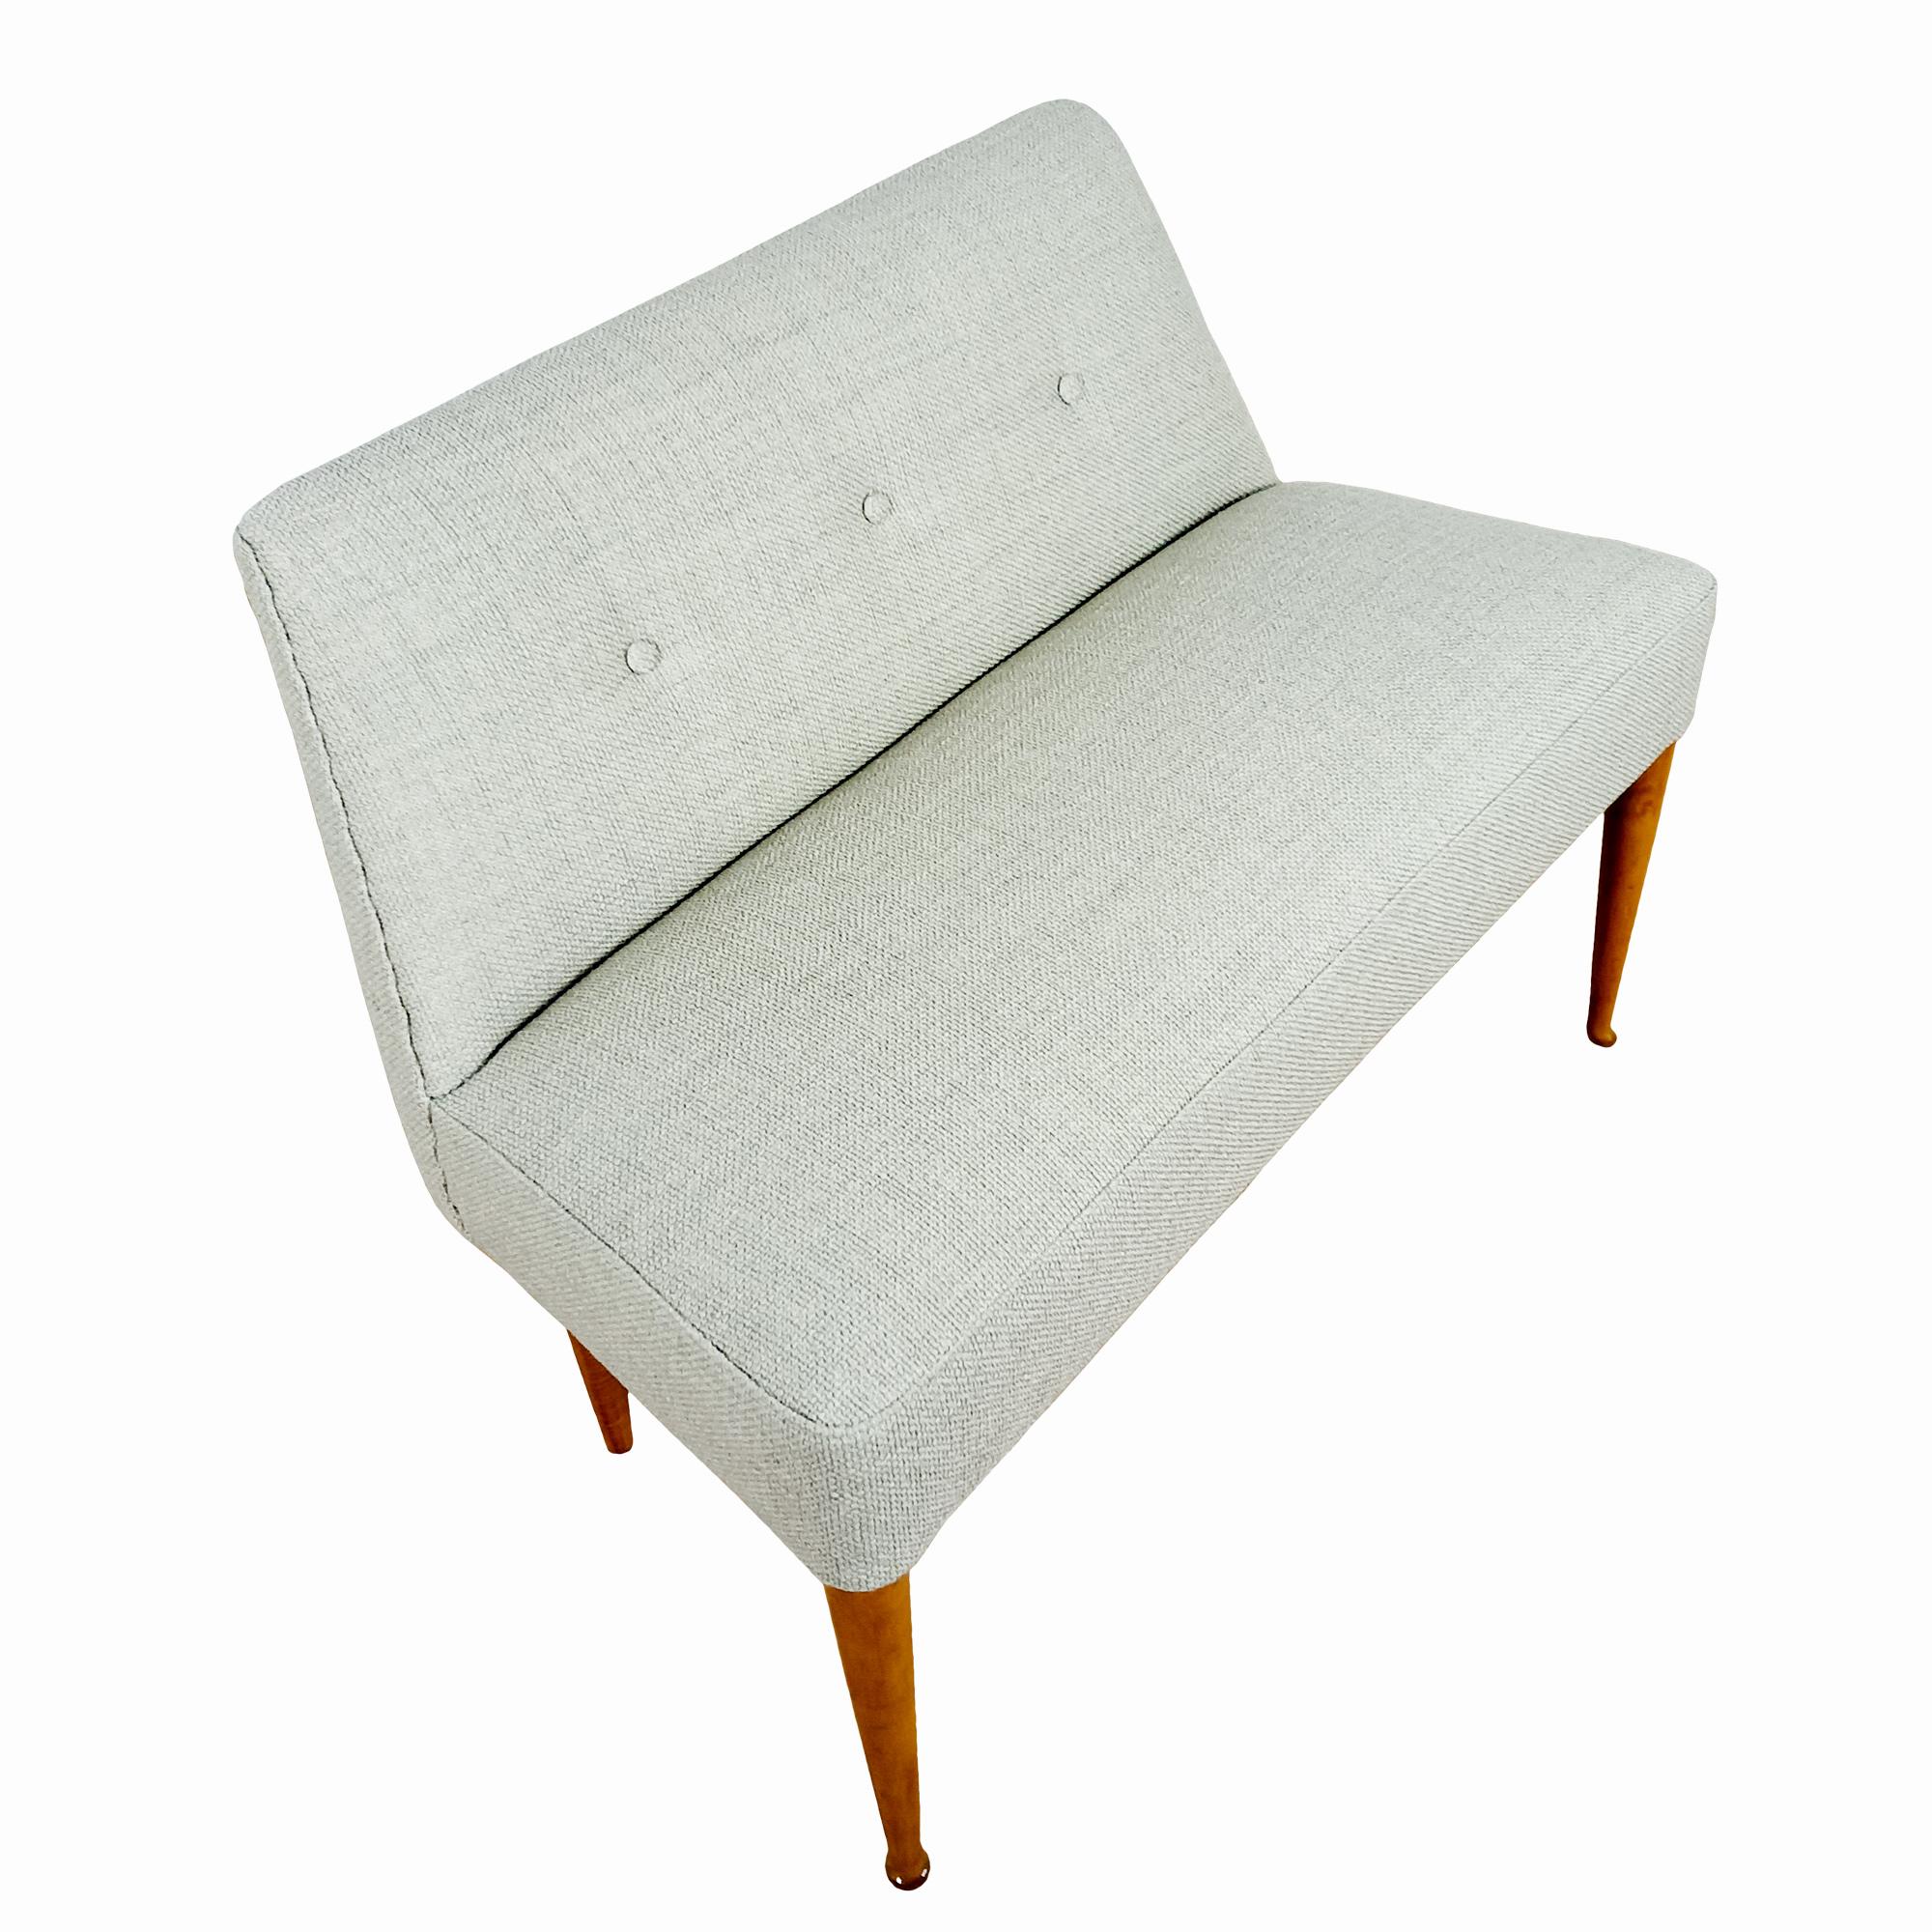 Small MId-Century Modern Bench in Greige Chenille Fabric - Italy, Early 1950s In Good Condition For Sale In Girona, ES